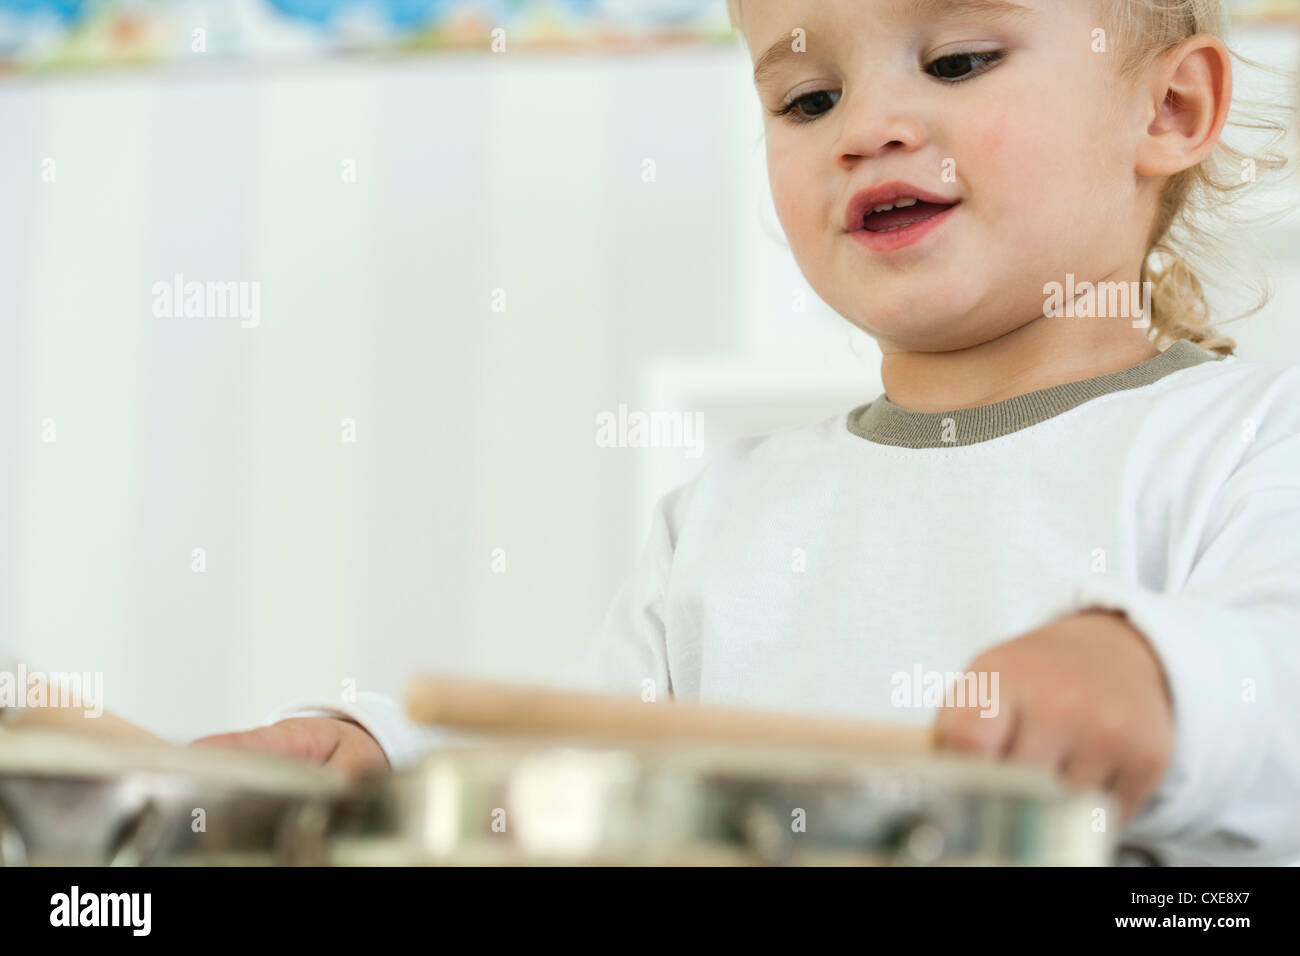 Baby boy playing drums, low angle view Stock Photo